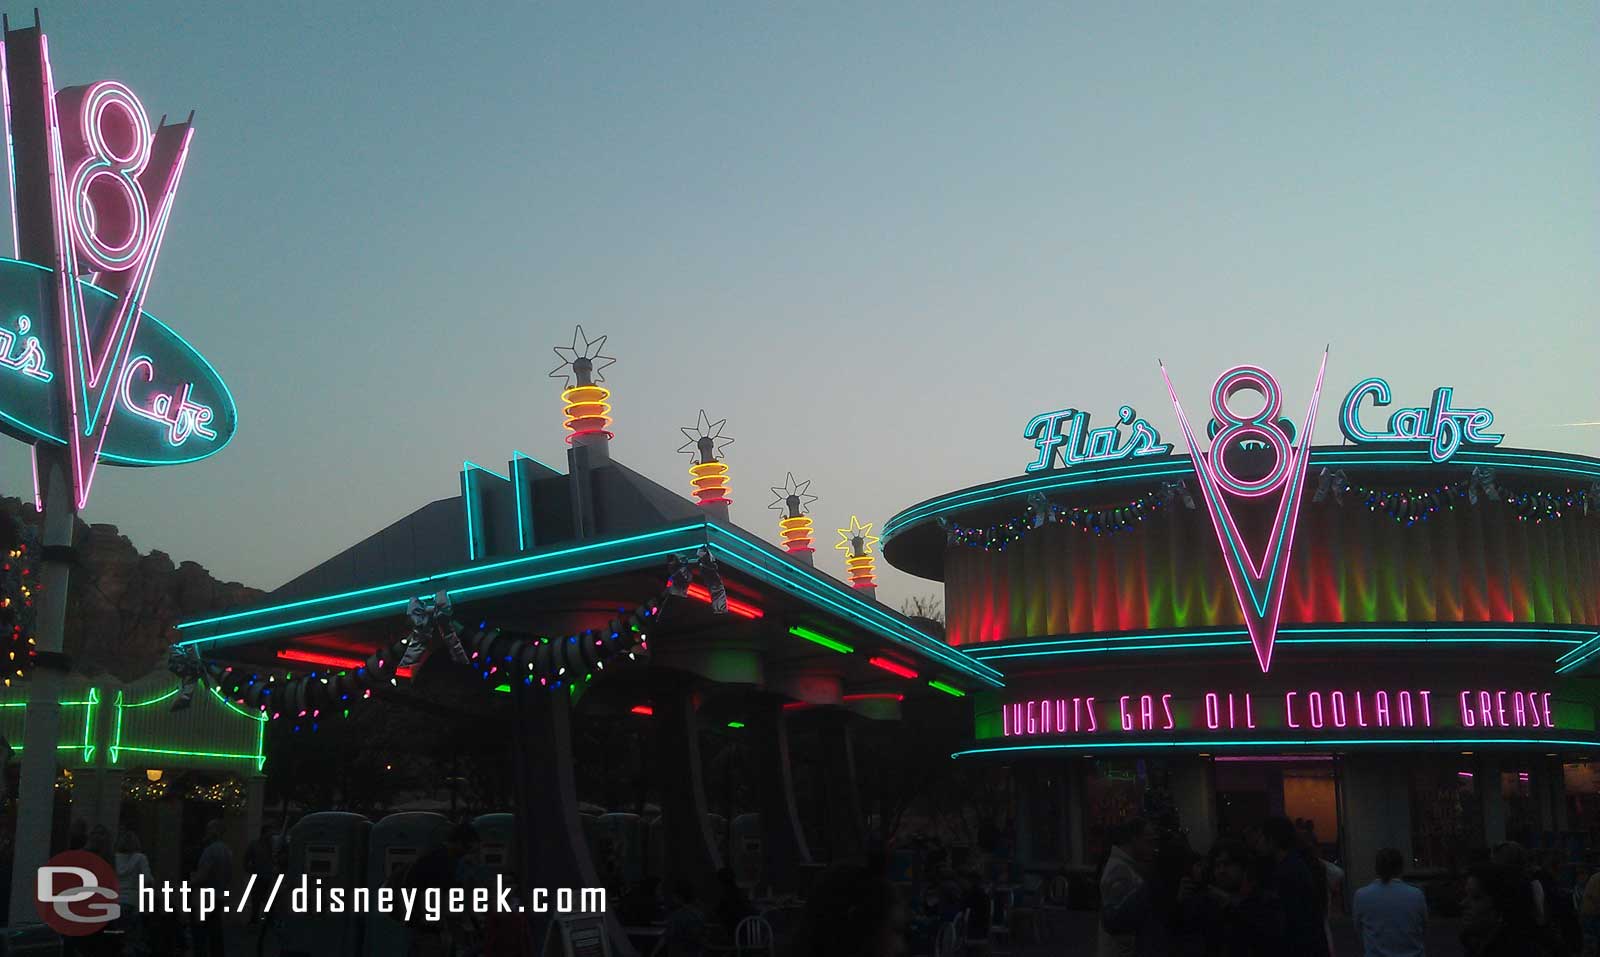 A favorite time of day in CarsLand the lights coming on while Winter Wonderland plays.